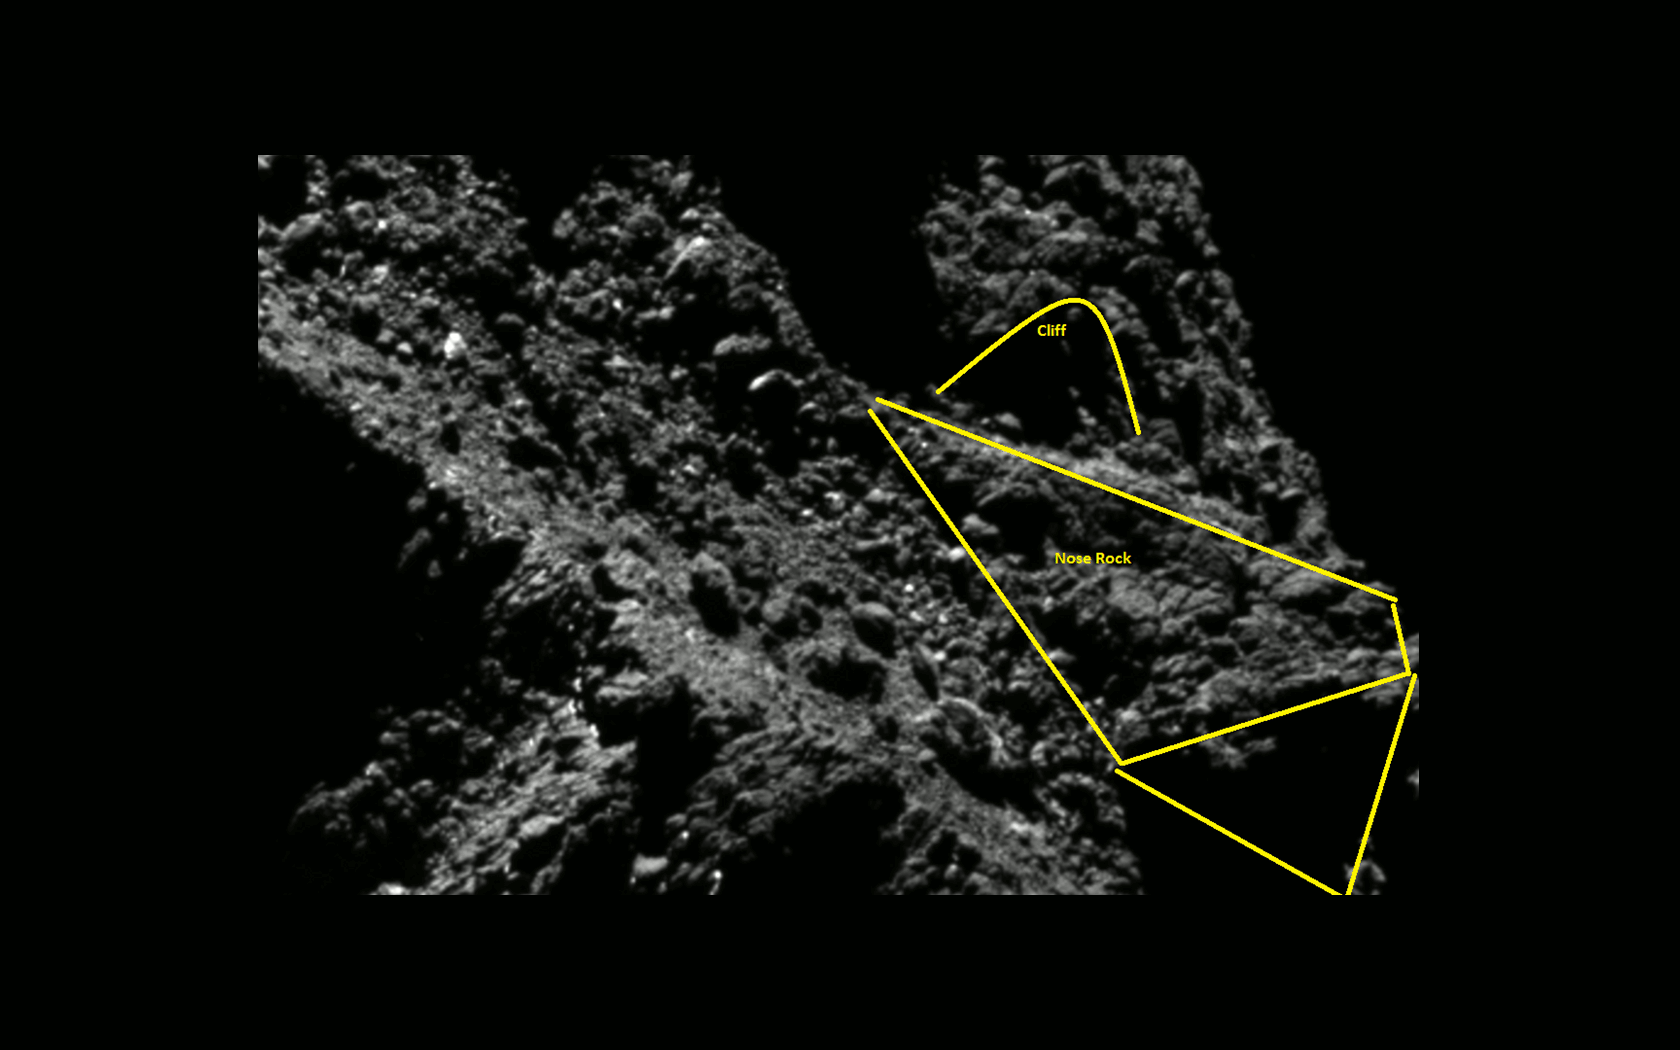 The scenery around Philae includes a ‘cliff overhang’ and a large ice/dust structure nicknamed the ‘nose rock’ (labelled). An enhanced view of the same region is shown, with a circle highlighting the lander candidate that becomes visible in the darkness from the reflected light emanating from the outside of the cliff. The last image shows the orientation of the lander from the 3D model. Credits: Image: ESA/Rosetta/MPS for OSIRIS Team MPS/UPD/LAM/IAA/SSO/INTA/UPM/DASP/IDA: Lander search analysis: L. O’Rourke; CNES/GFI/3DView tool/J. Durand/ G. Faury